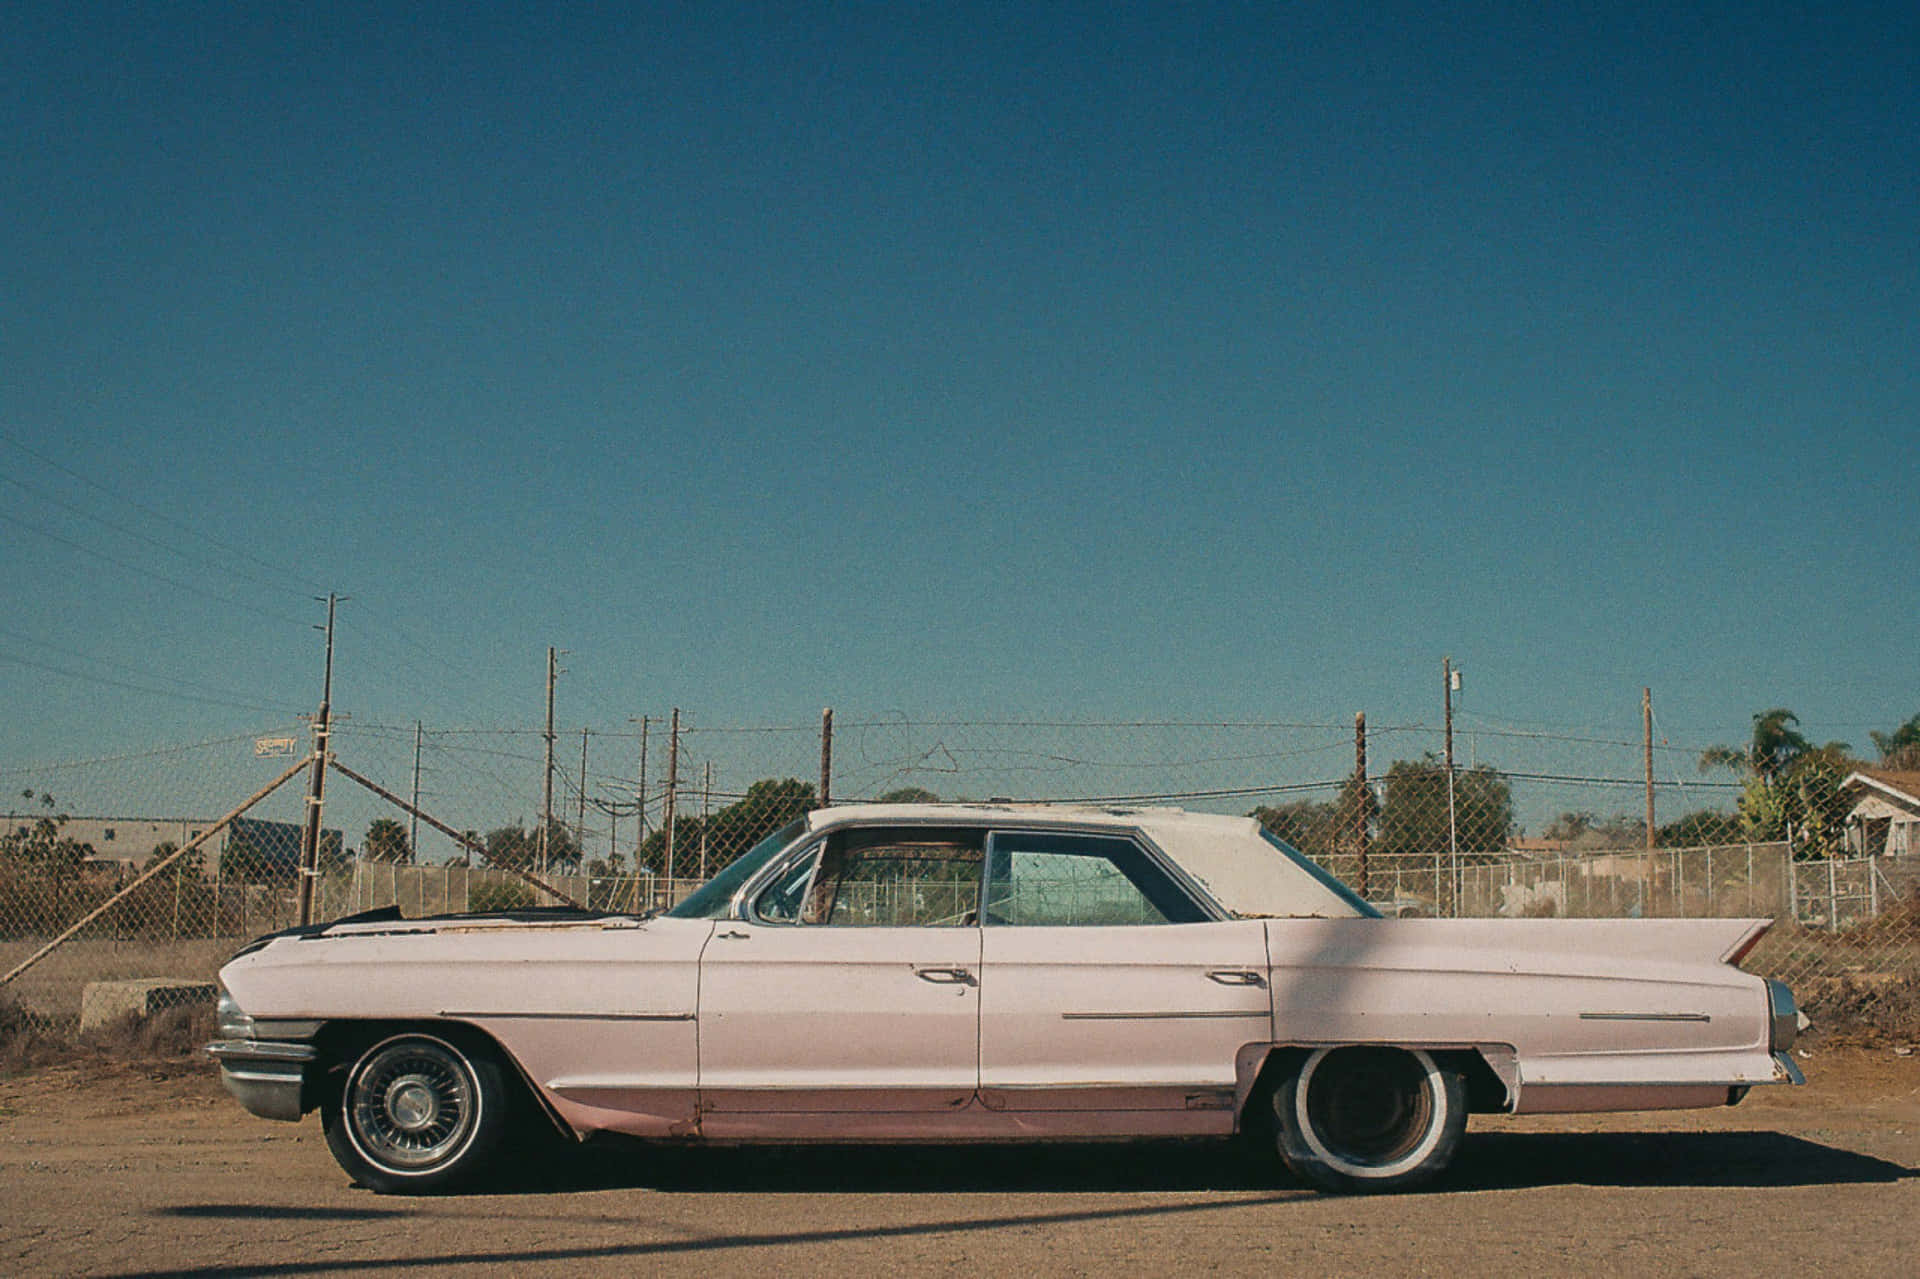 Vintage Pink Cadillac on the Open Road Wallpaper